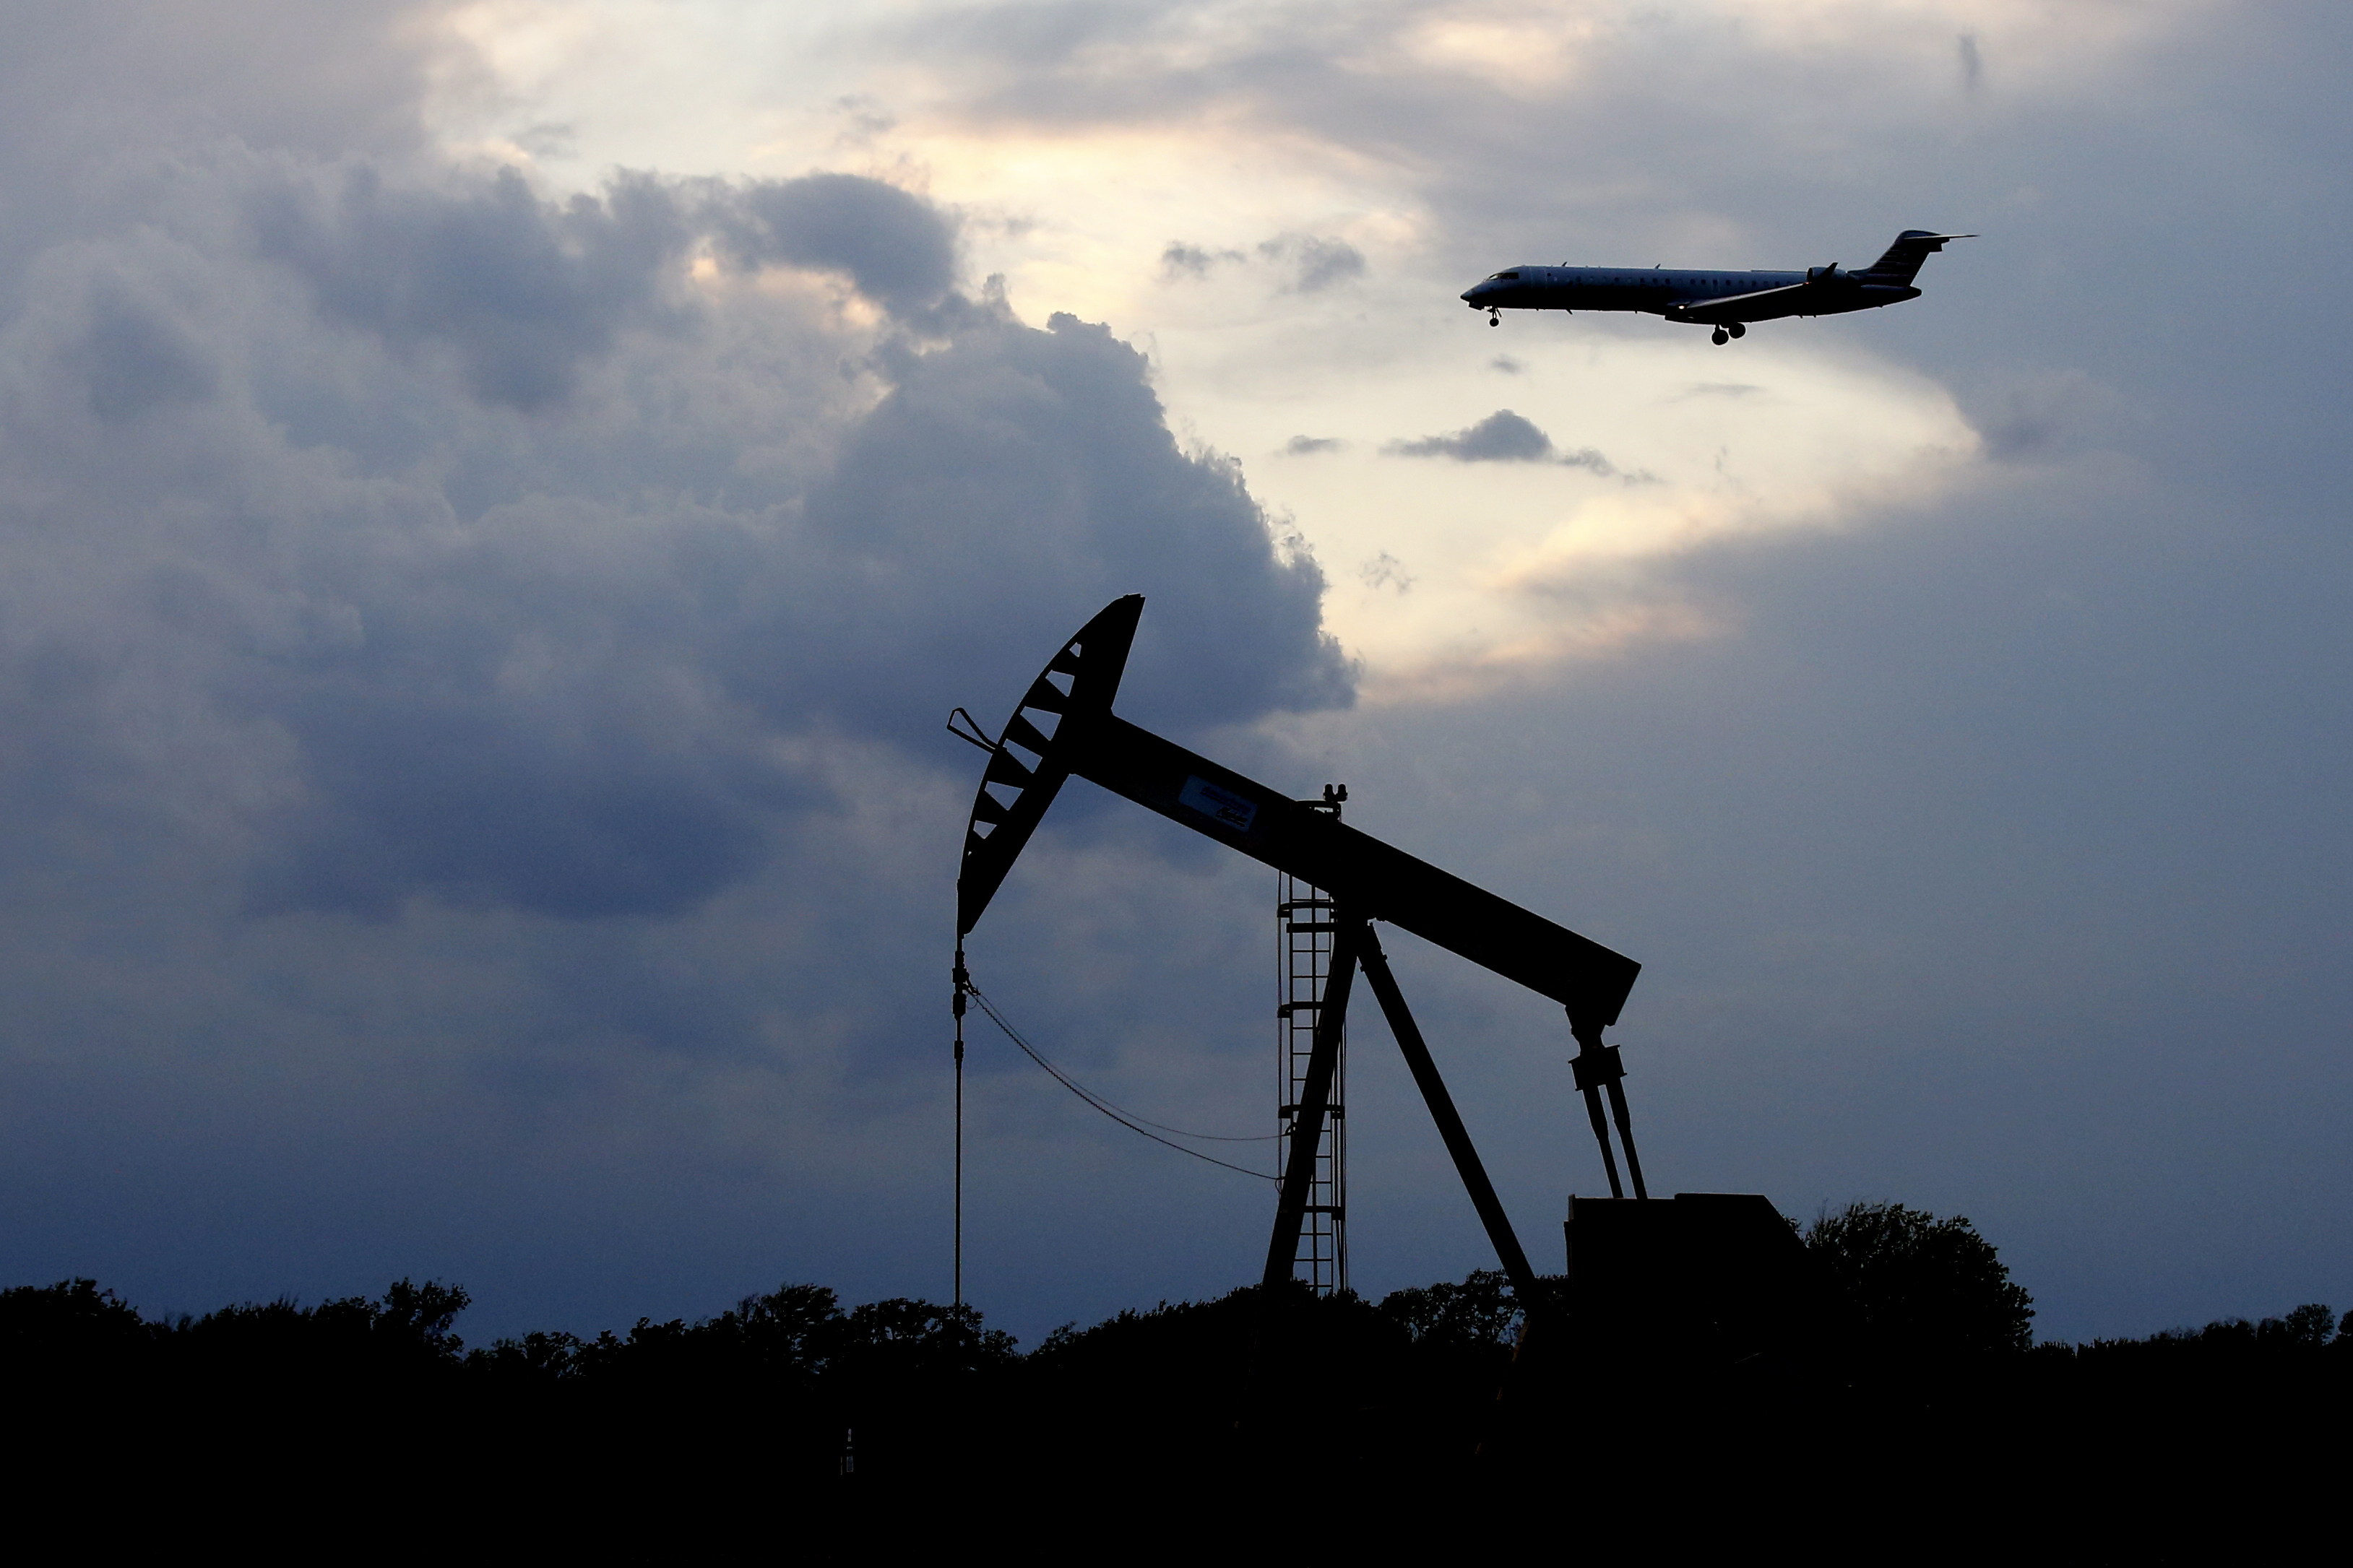 A plane comes in for a landing behind a pumpjack Tuesday, April 21, 2020, in Oklahoma City. Oil prices continue to drop, because very few people are flying or driving, and factories have shut amid widespread stay-at-home orders due to the coronavirus concerns. (AP Photo/Sue Ogrocki)